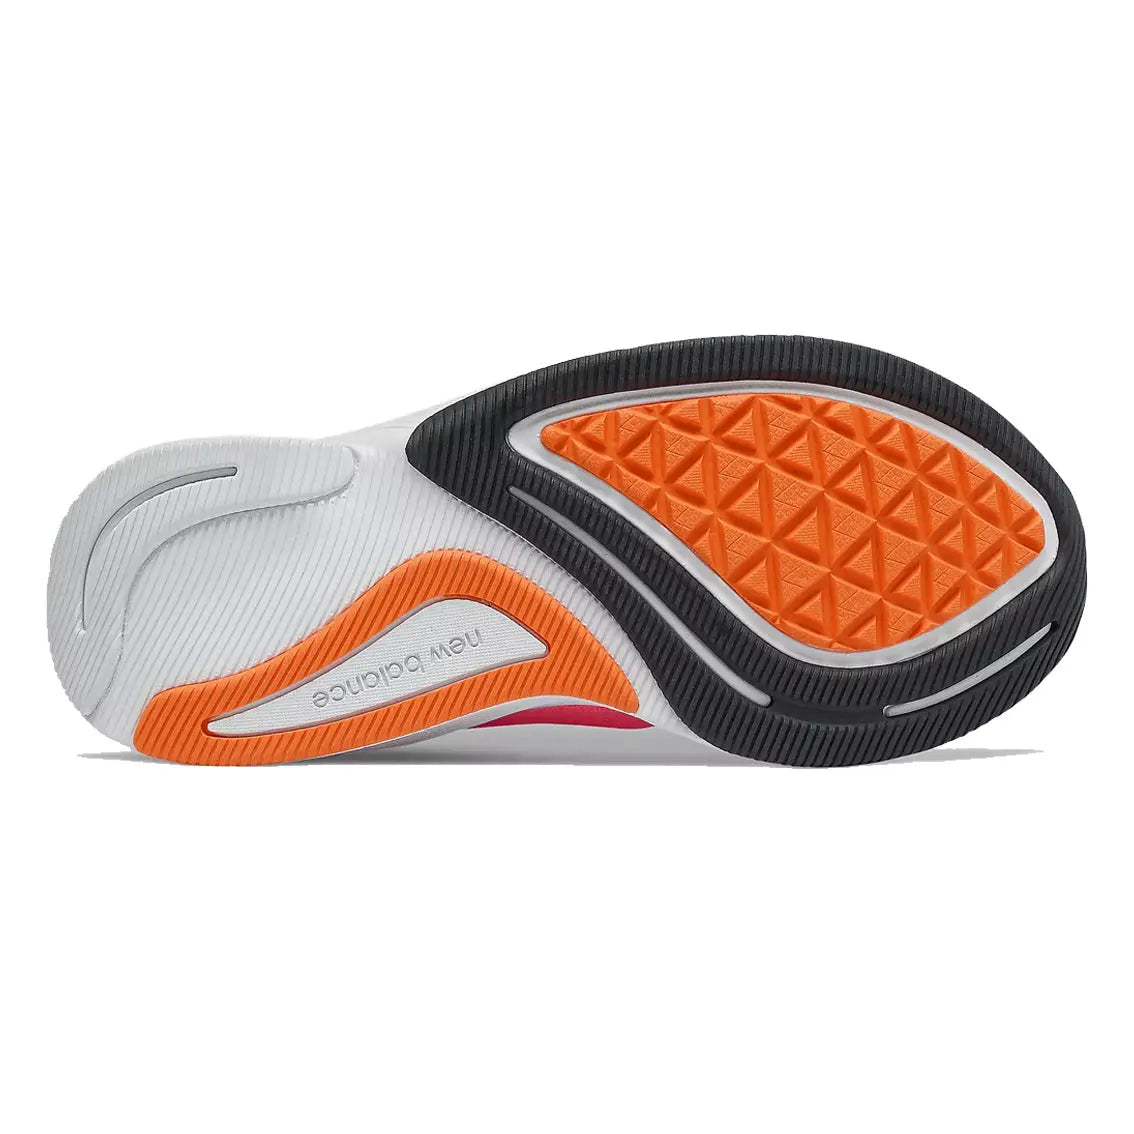 Kids New Balance FuelCell Prism - Guava / Persimmon